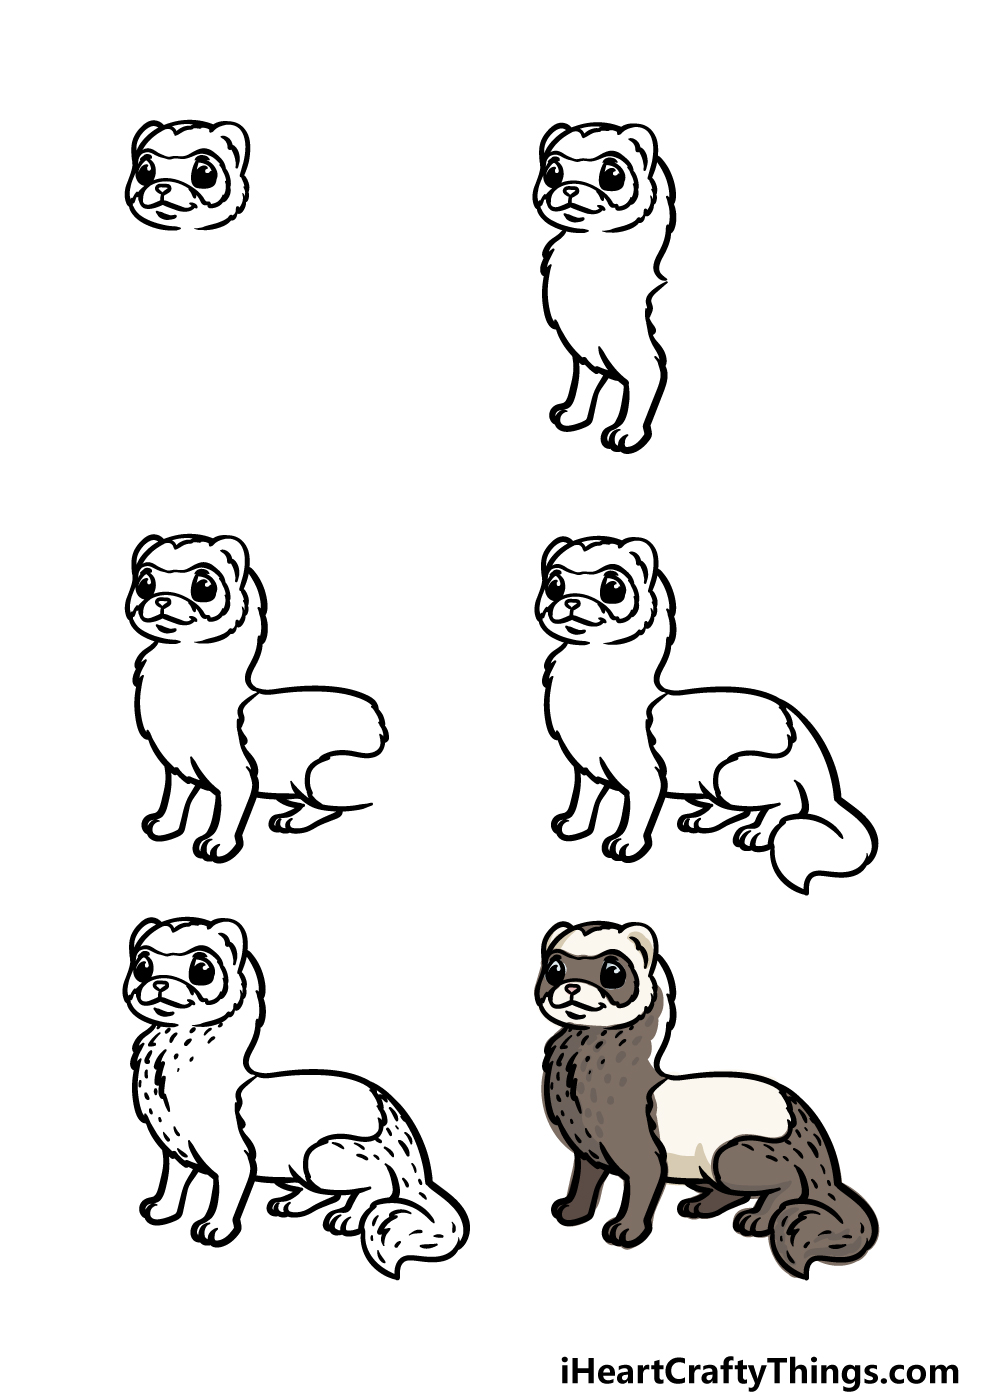 how to draw a ferret in 6 steps